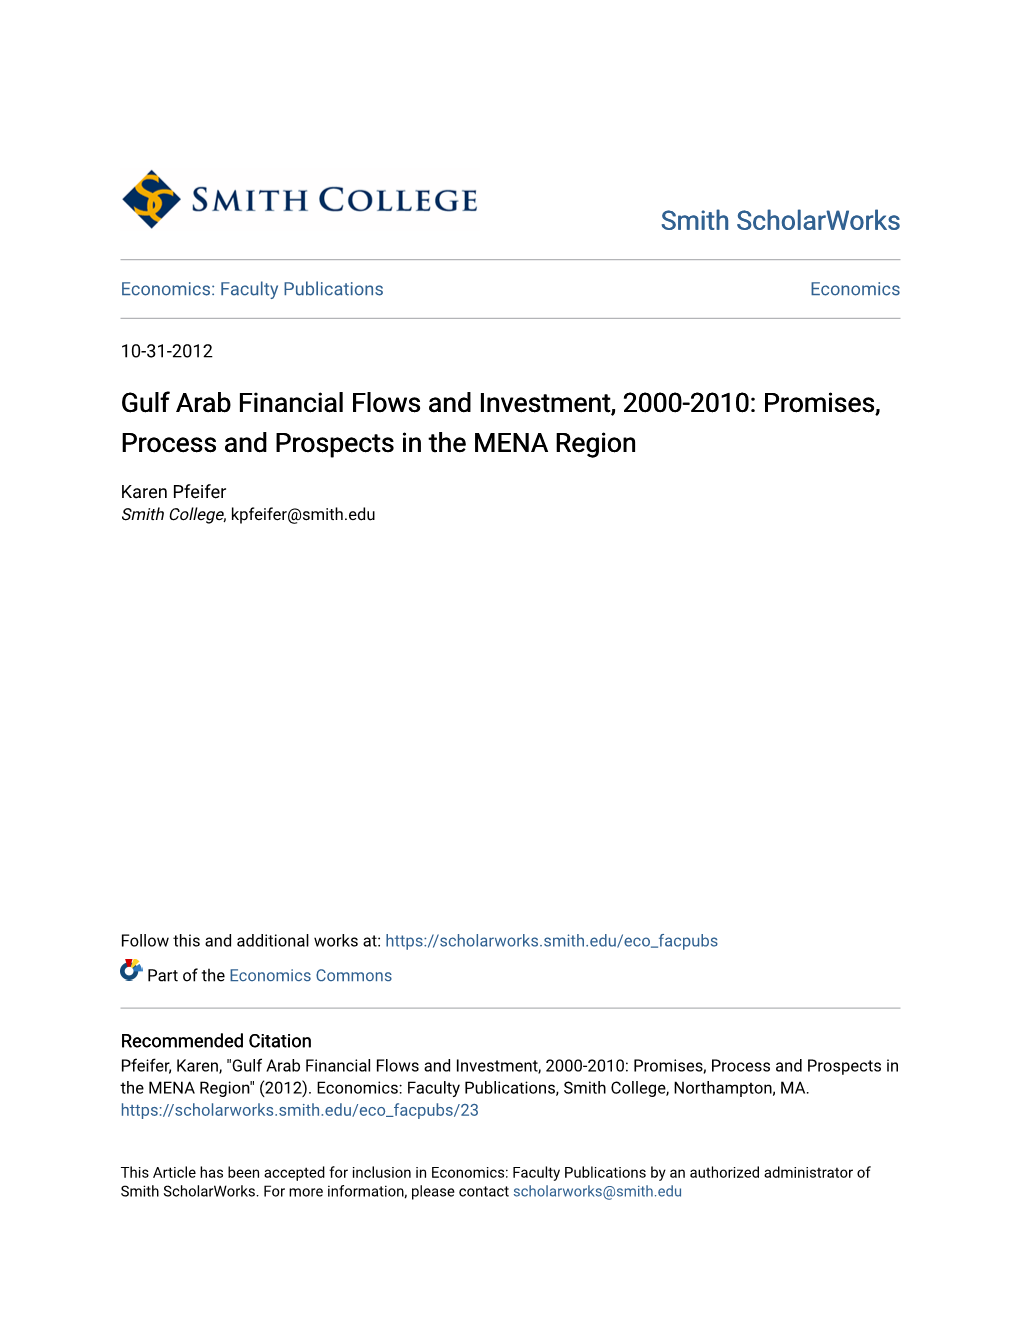 Gulf Arab Financial Flows and Investment, 2000-2010: Promises, Process and Prospects in the MENA Region